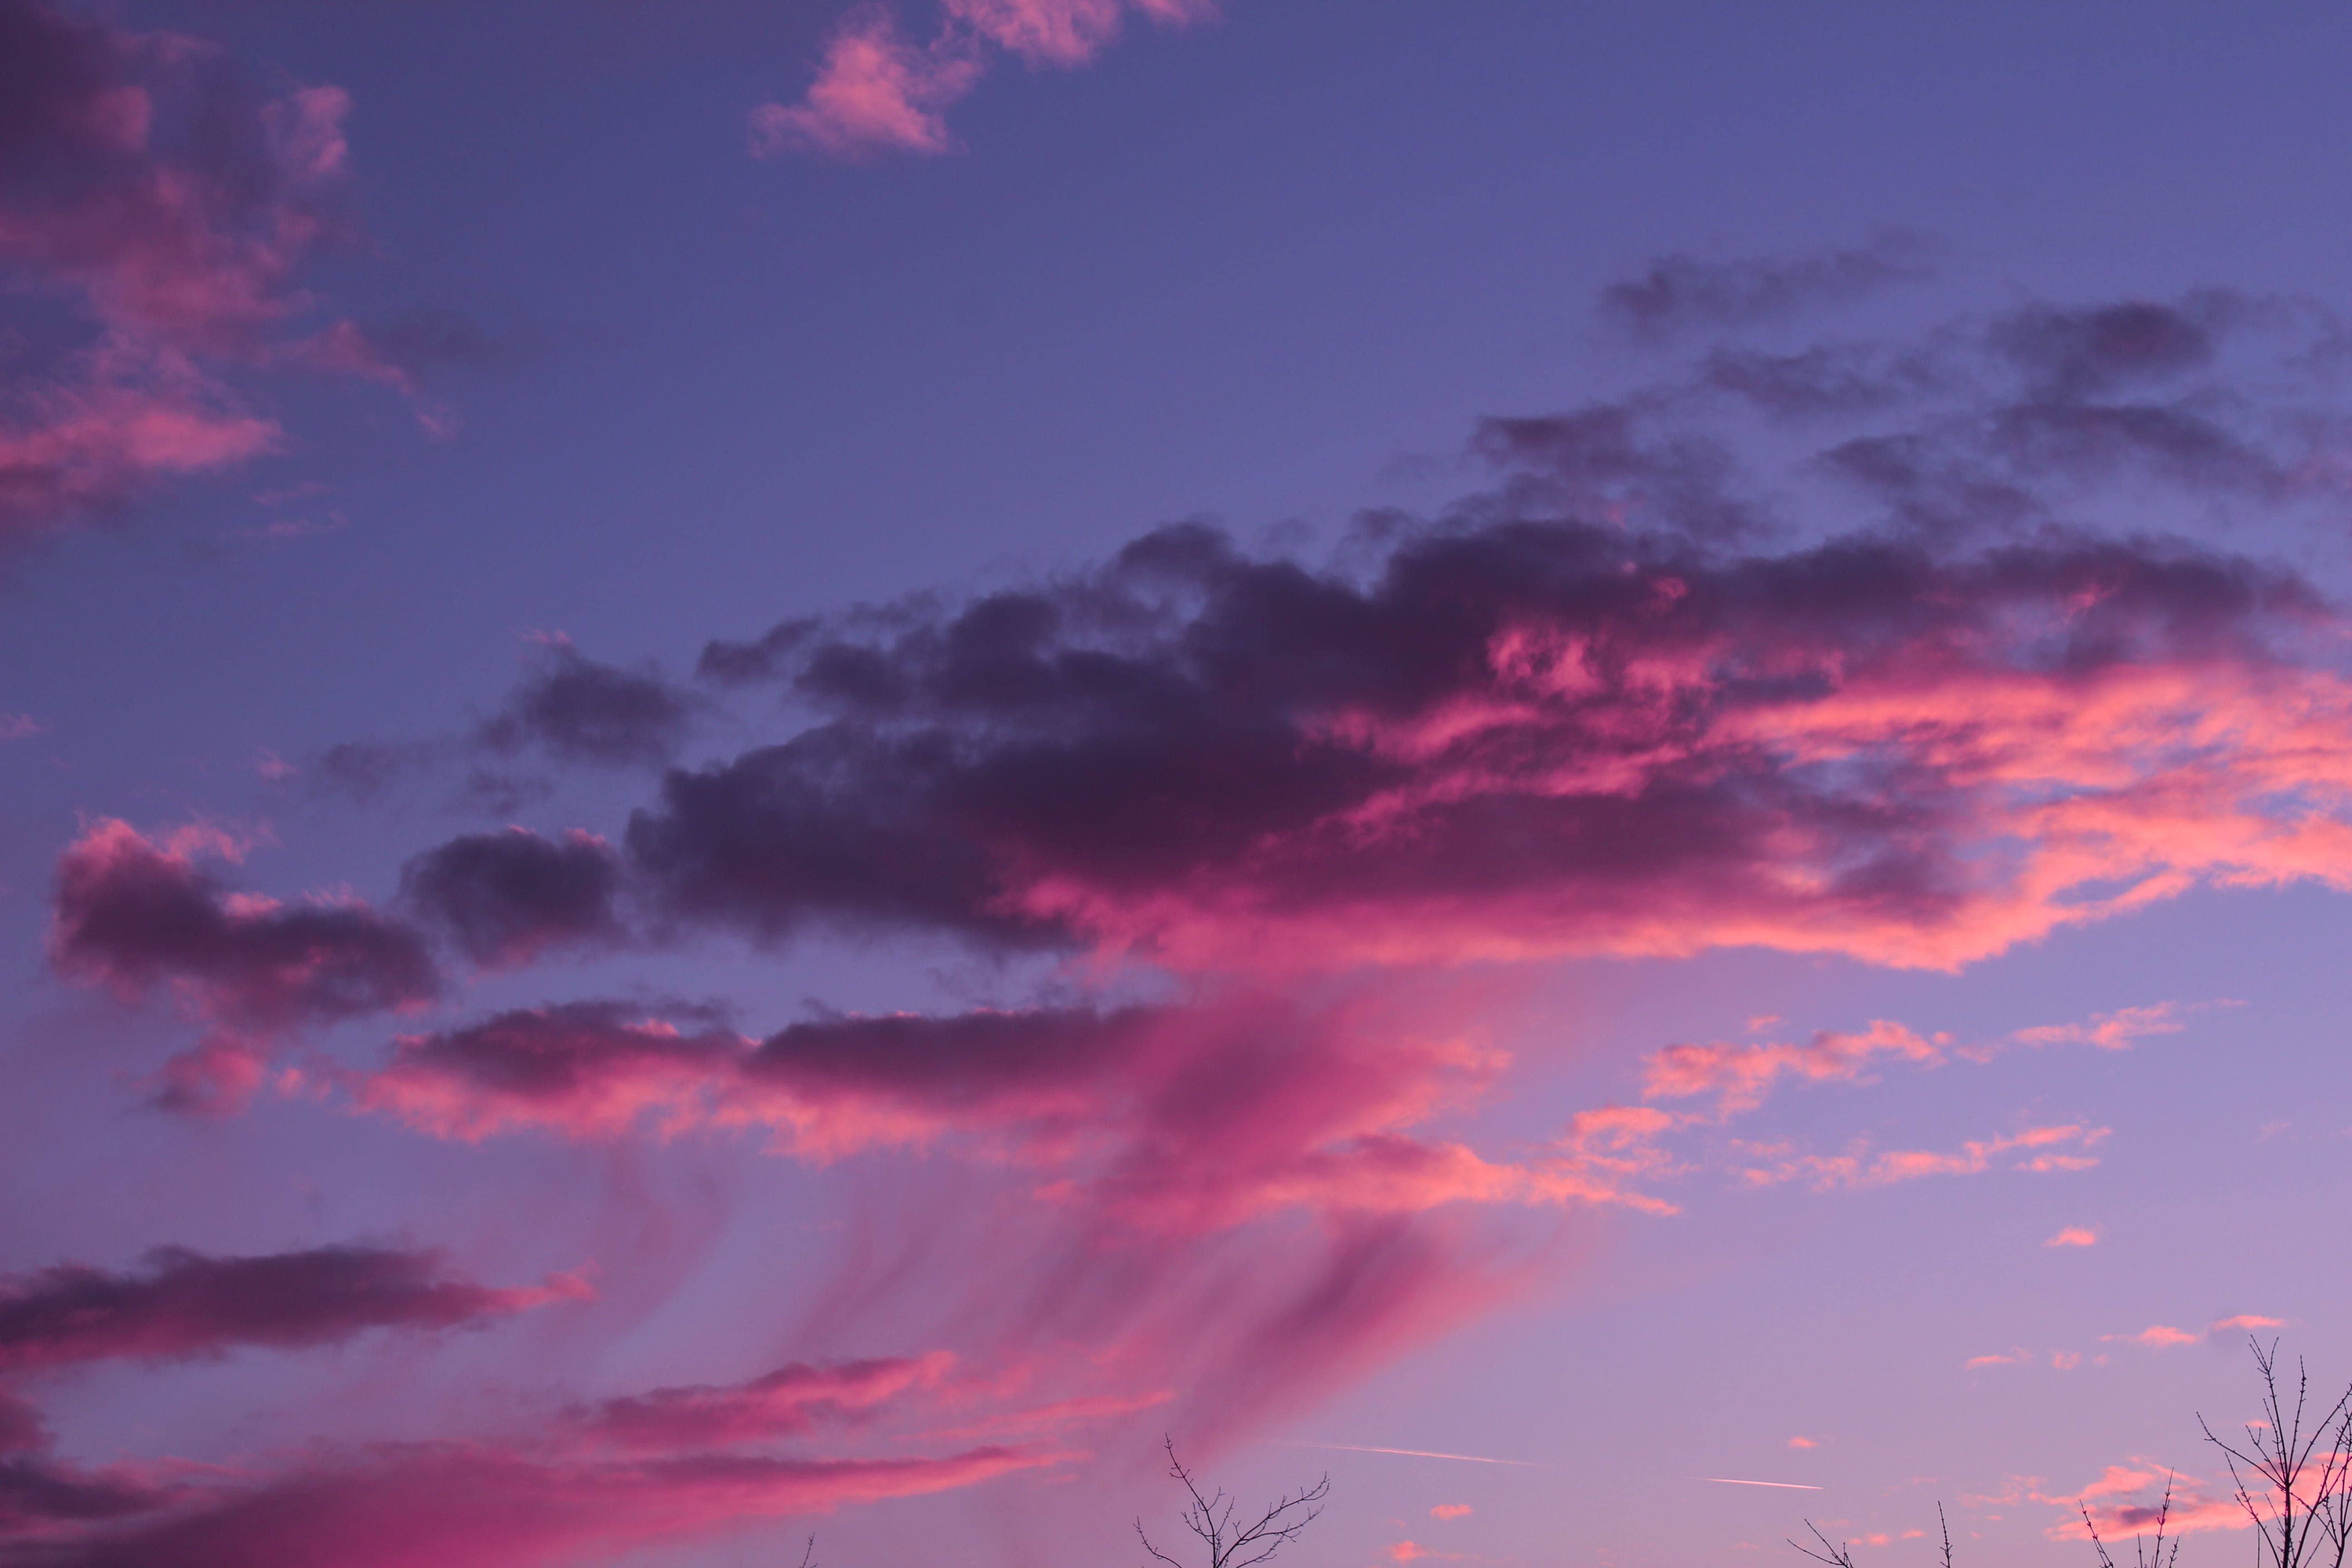 Sky wallpaper, sunset, clouds, pink, neon, purple, pastel, fading, wild. Pink clouds wallpaper, Computer wallpaper desktop wallpaper, Purple wallpaper